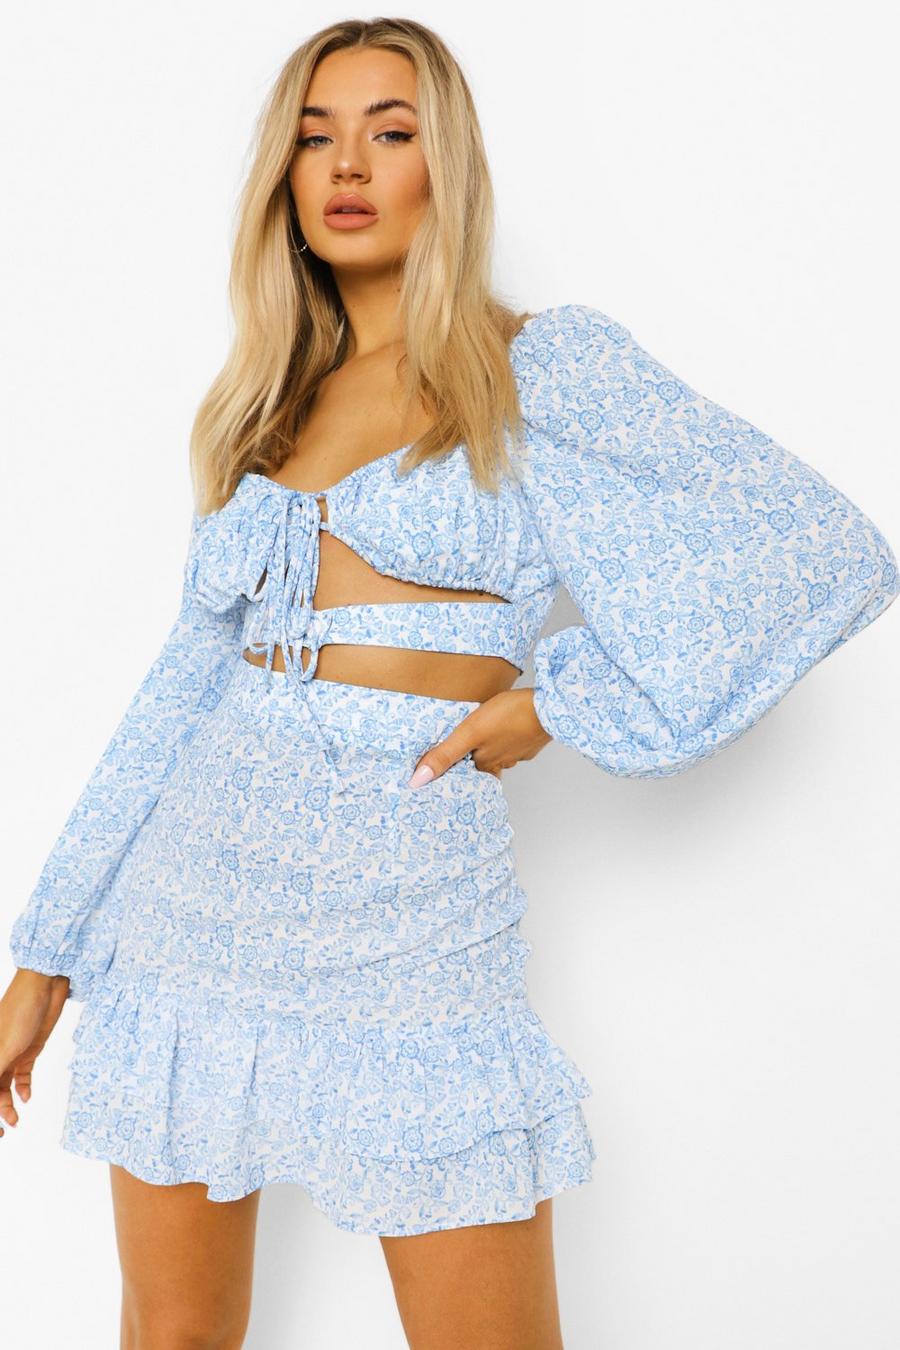 Blue Floral Cut Out Ruffle Skirt Two-Piece